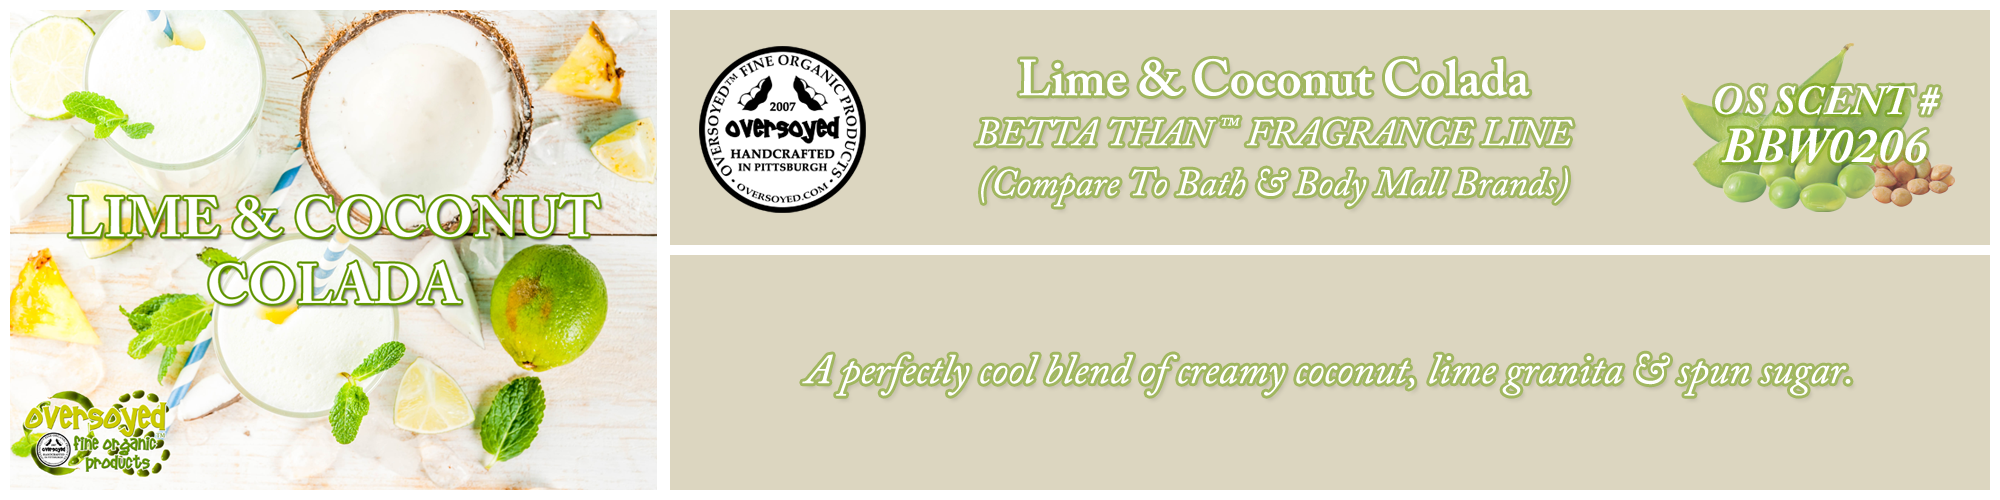 Lime & Coconut Colada Handcrafted Products Collection